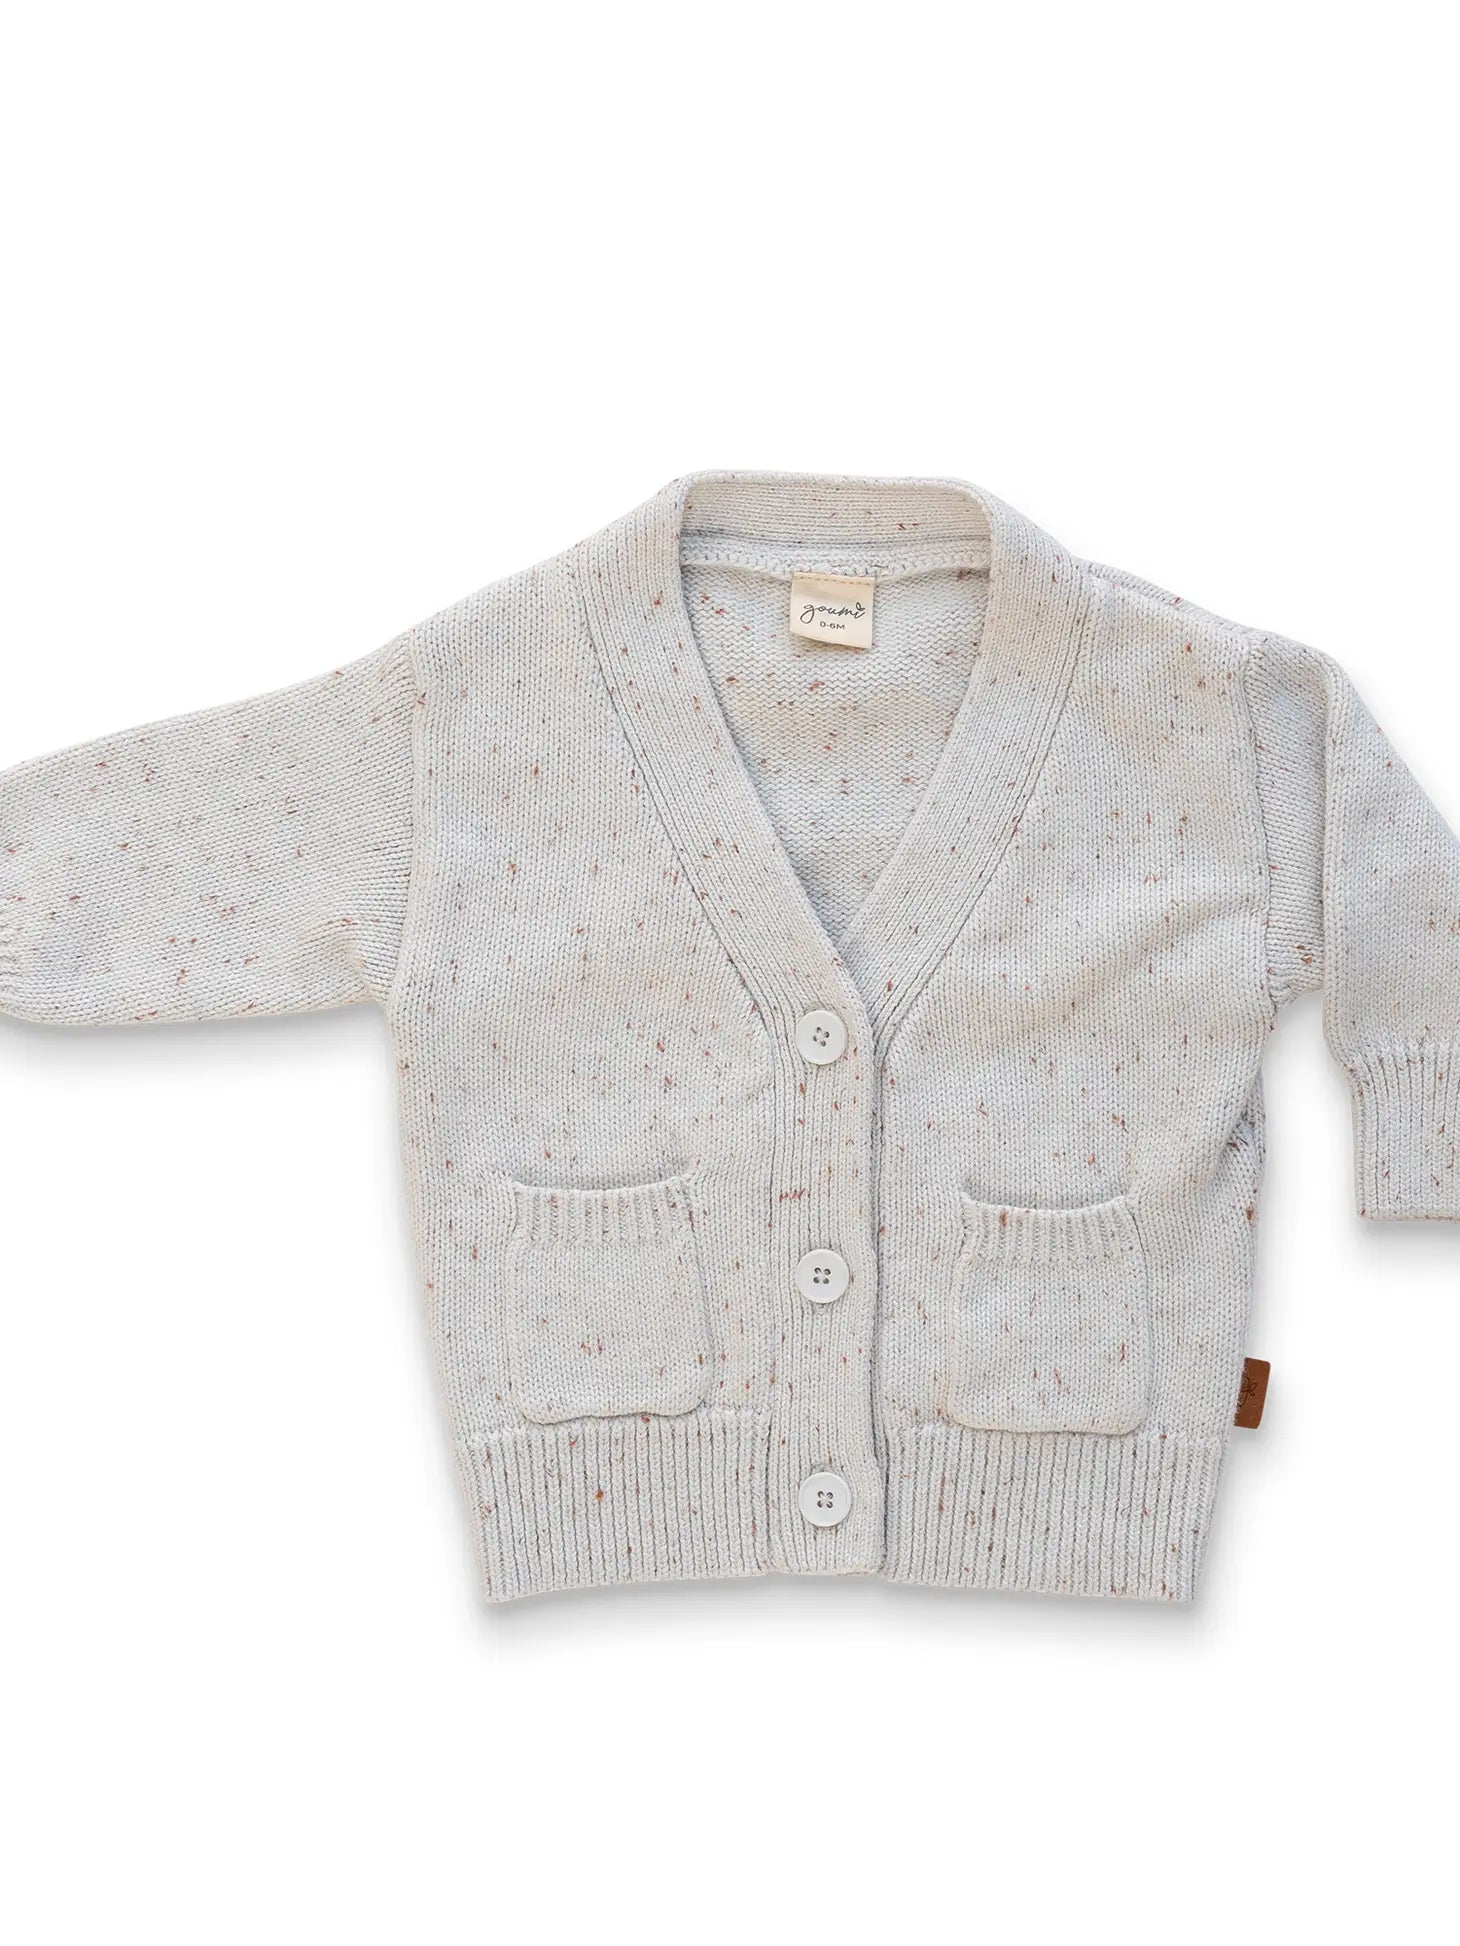 Cotton Knit Button-Up- Shell - Lulie